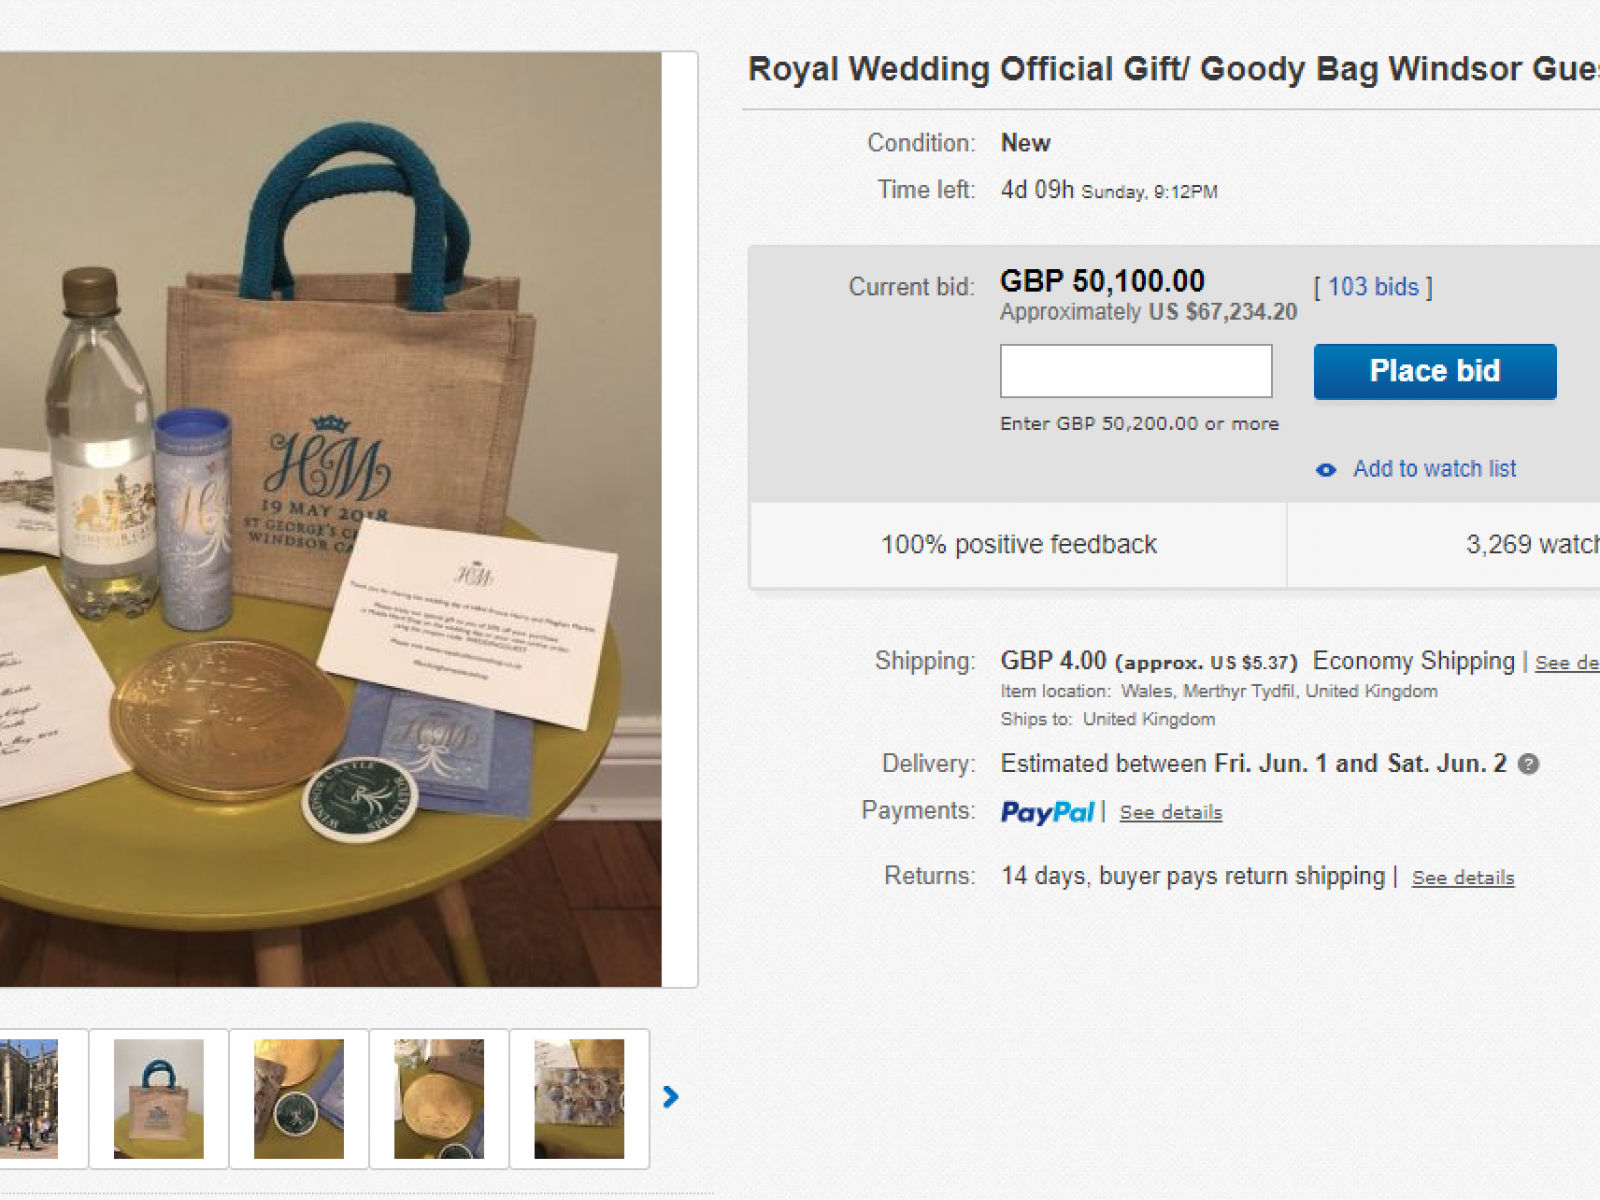 Who Pays for Wedding Welcome Bags?